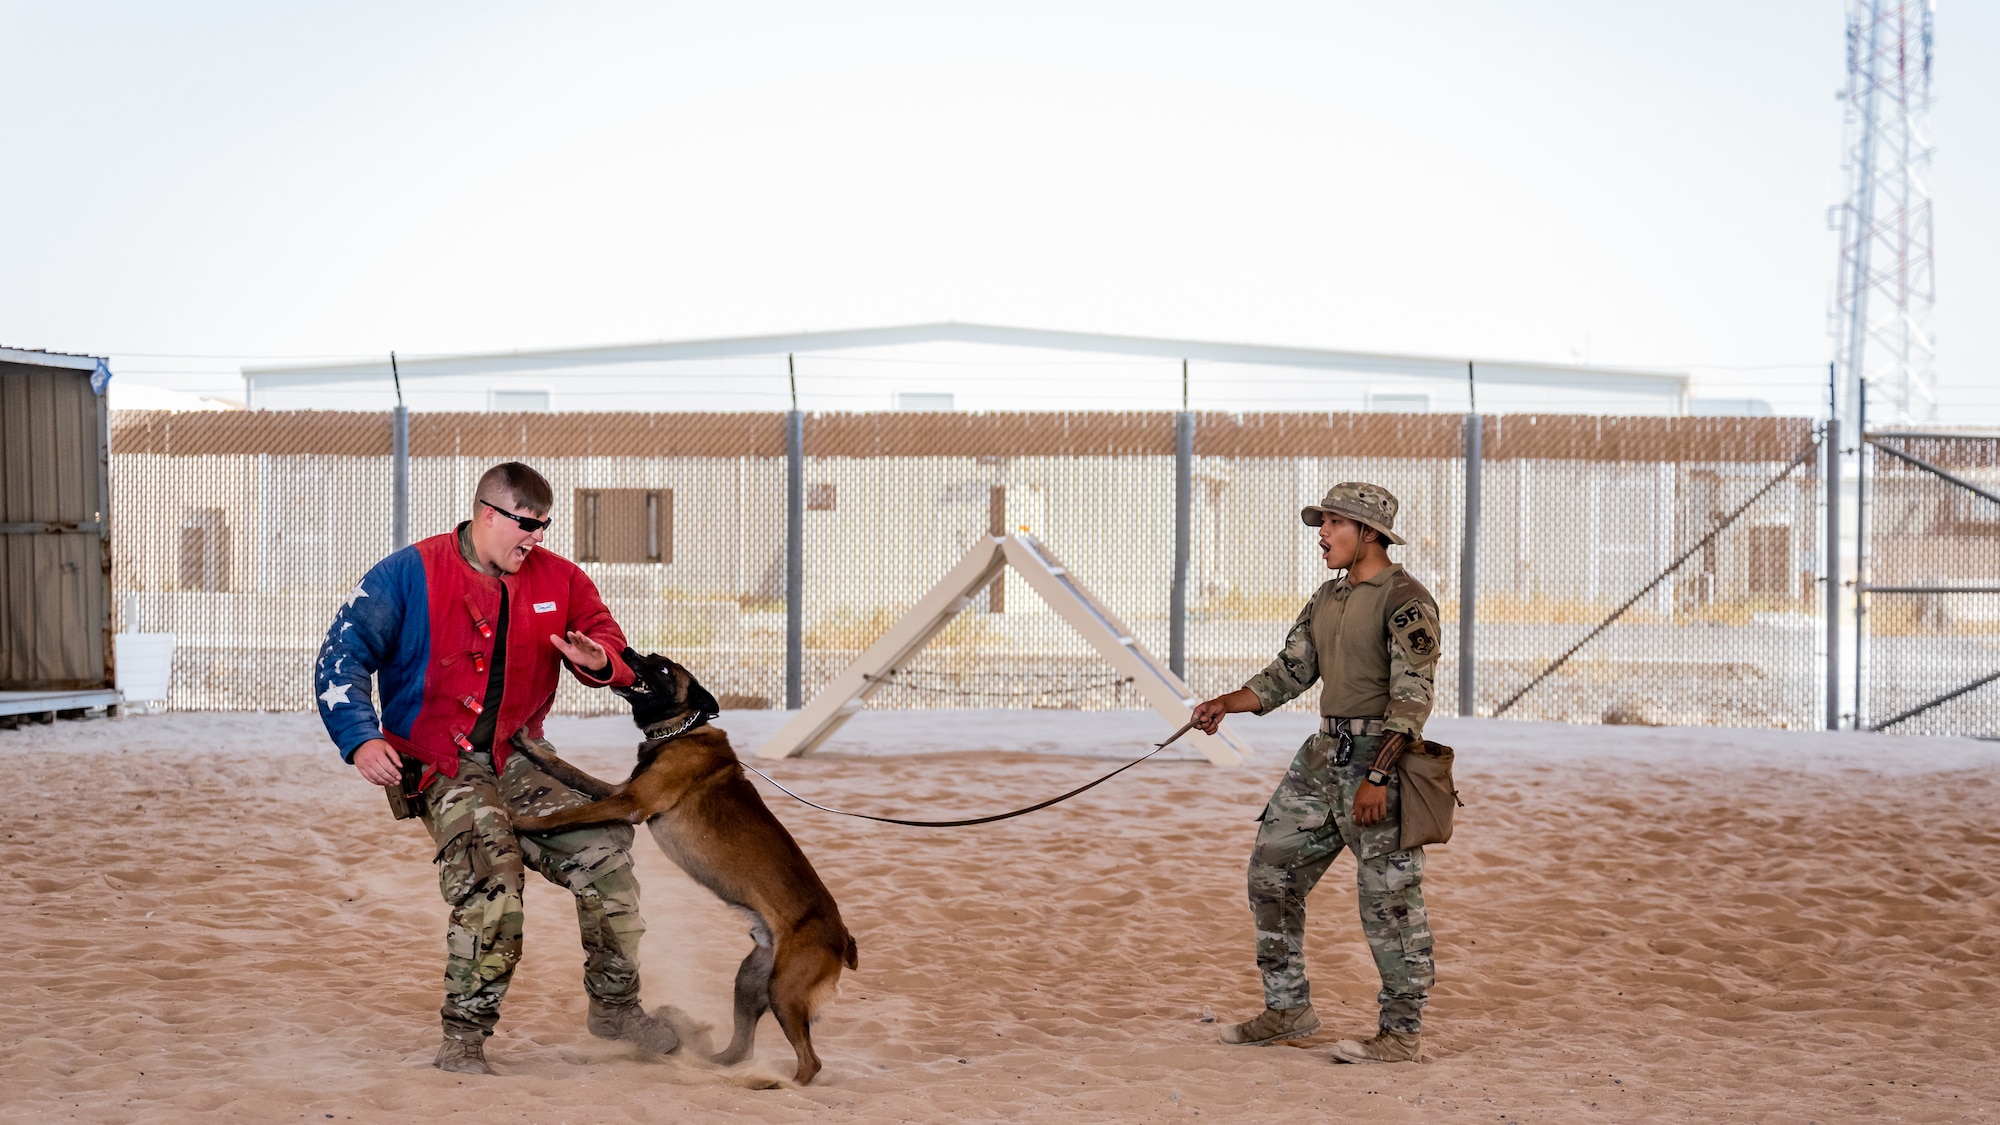 U.S. Air Force Senior Airman Christian Yadao, 386th Expeditionary Security Forces Squadron military working dog handler, commands MWD Betyar to take down Staff Sgt. Gage Hyler, 386th ESFS MWD handler, during bite training at Ali Al Salem Air Base, Kuwait, July 26, 2023. Ali Al Salem Air Base is the largest hub for MWDs in and out of the U.S. Central Command area of responsibility. (U.S. Air Force photo by Staff Sgt. Kevin Long)